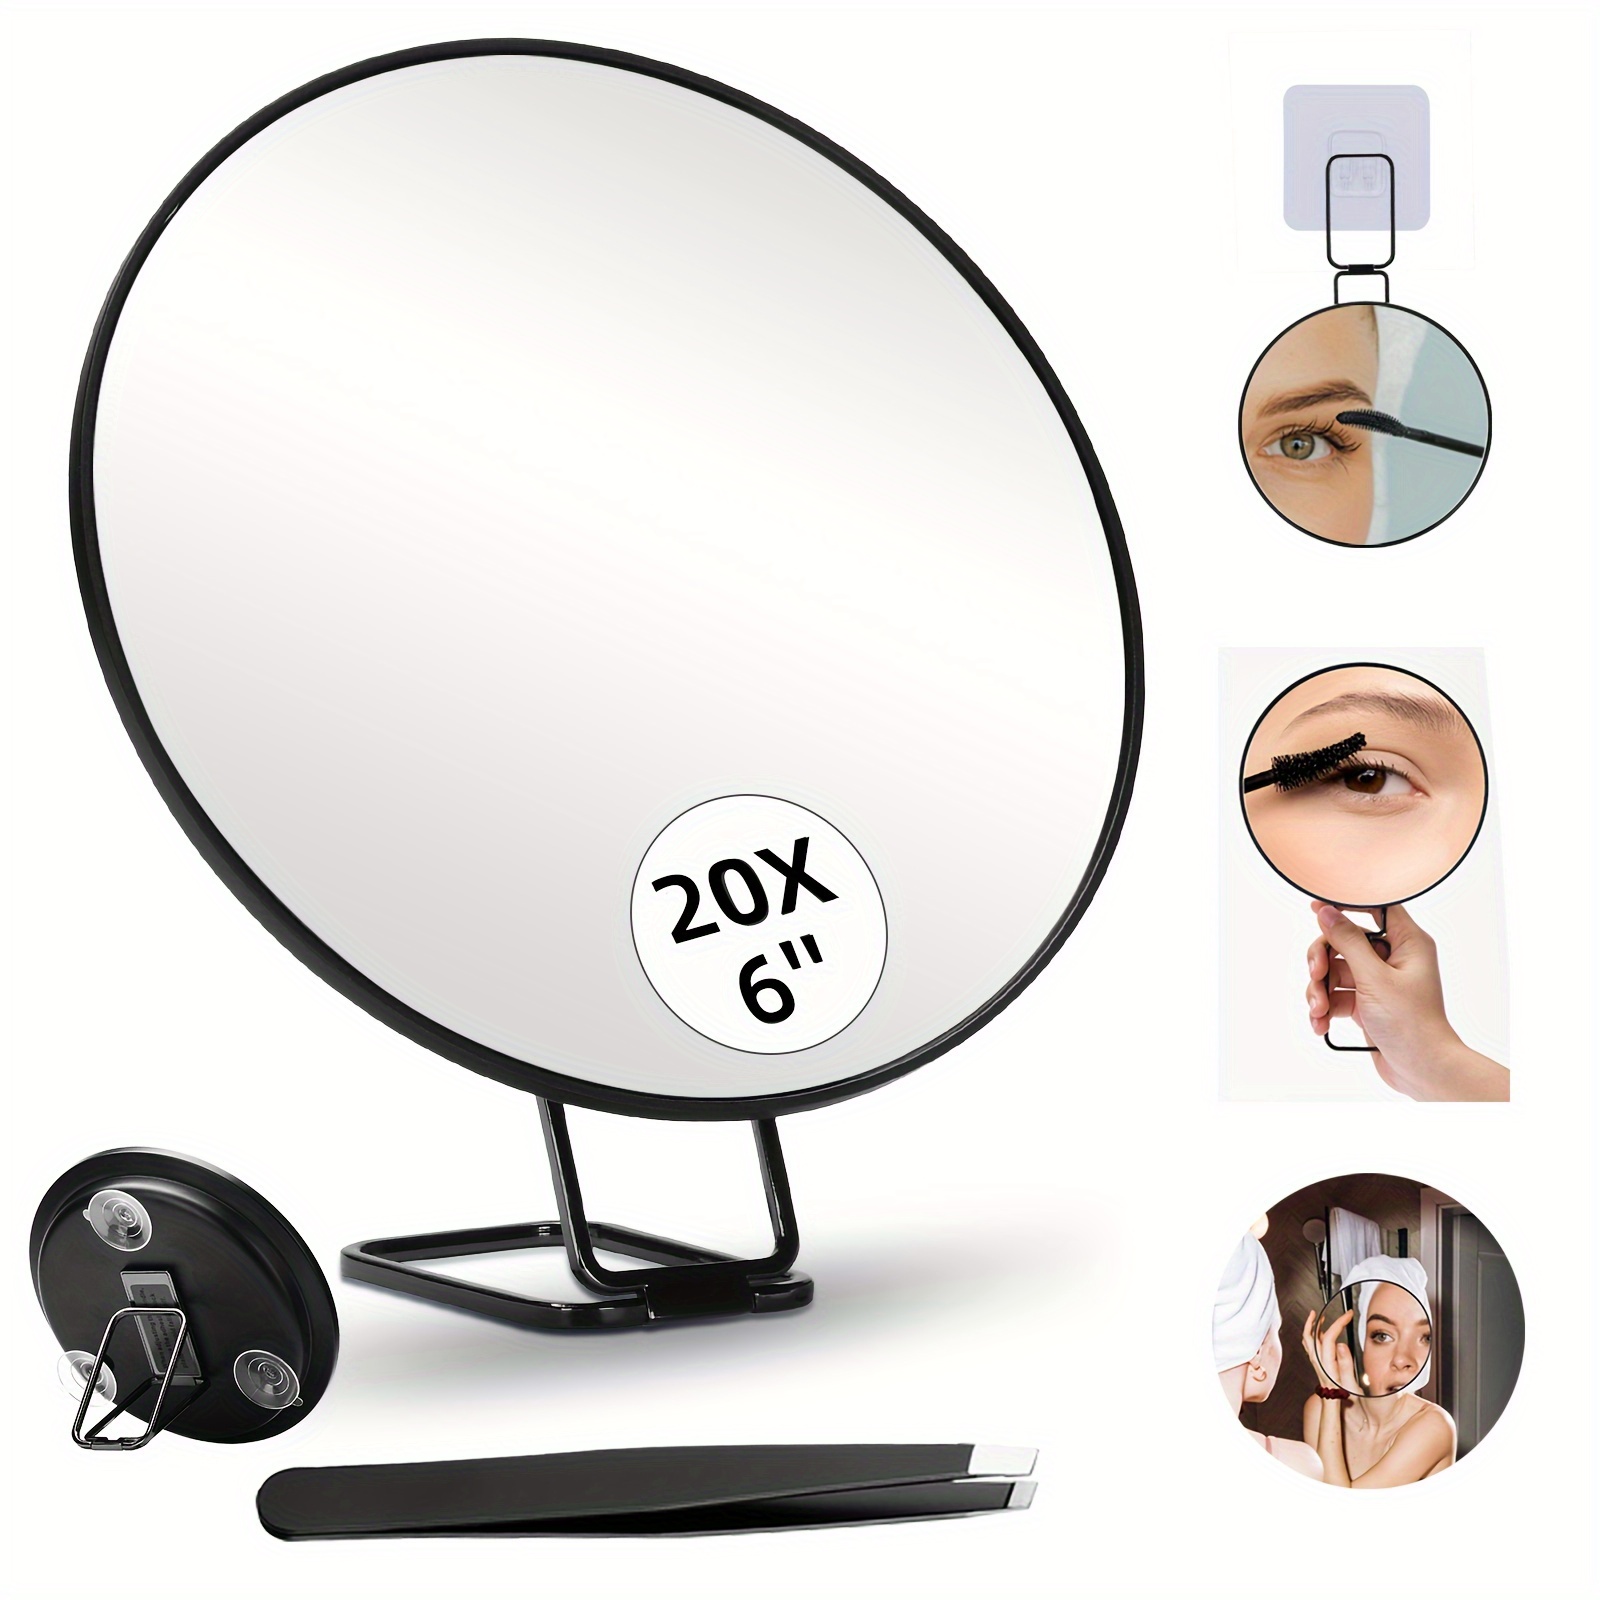 

6-inch Magnifying Makeup Mirror With Tweezer Kit, 20x/10x Magnification Options, 360° Swivel Handle, Suction Cup Mount For Handheld, Tabletop, Wall Use, Portable Mirror Set For Travel & Home